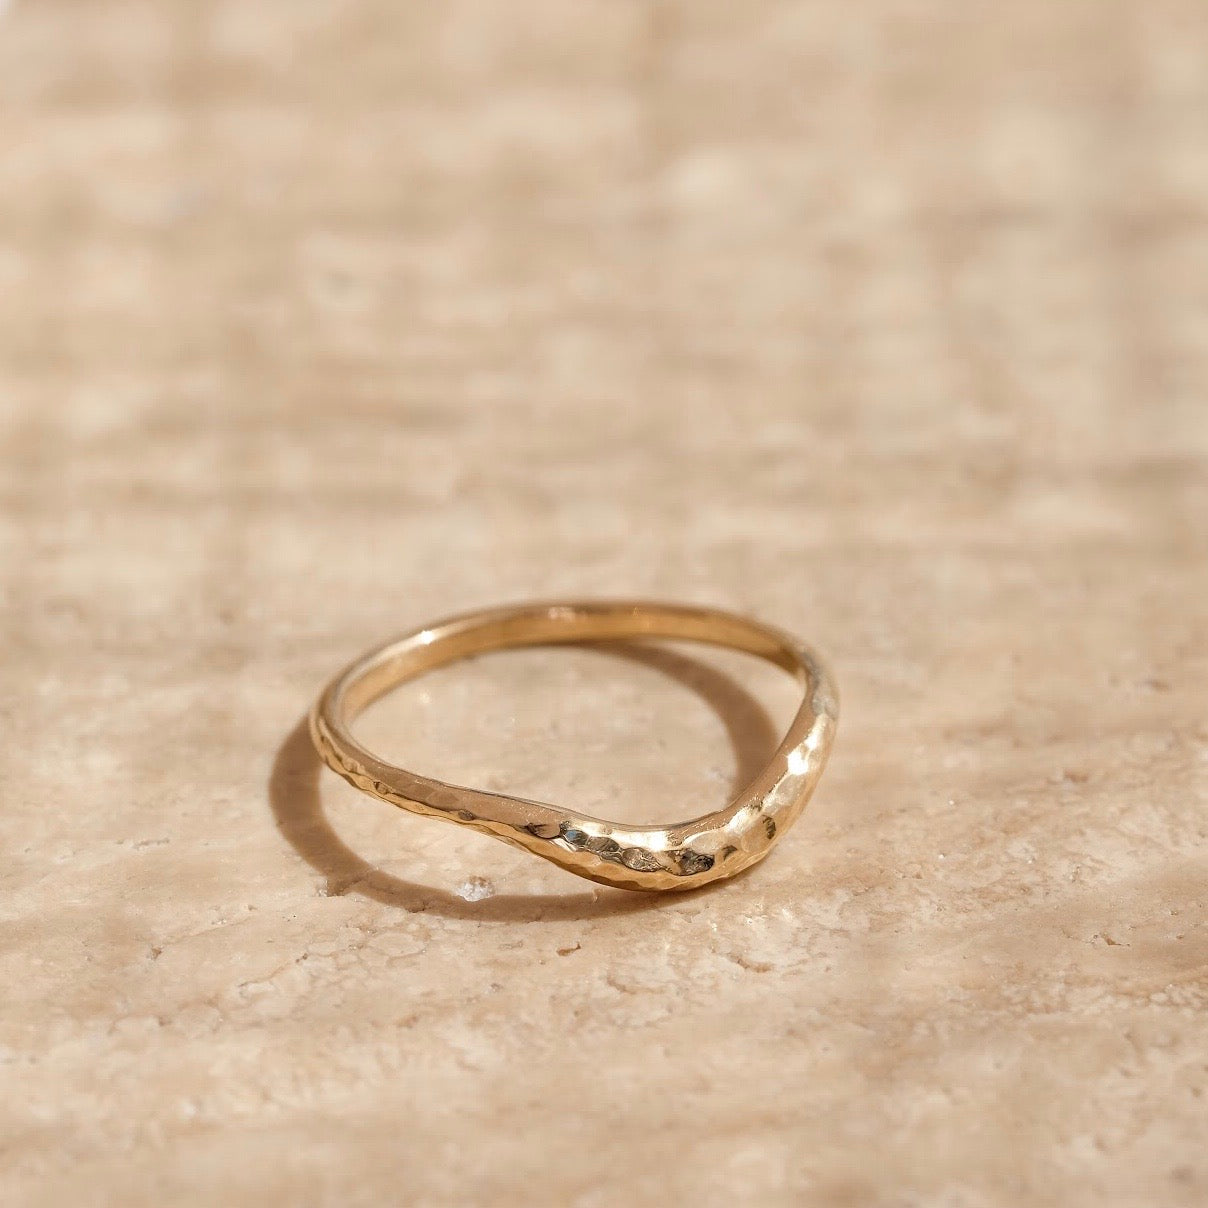 Crescent Band, 9kt Yellow Gold